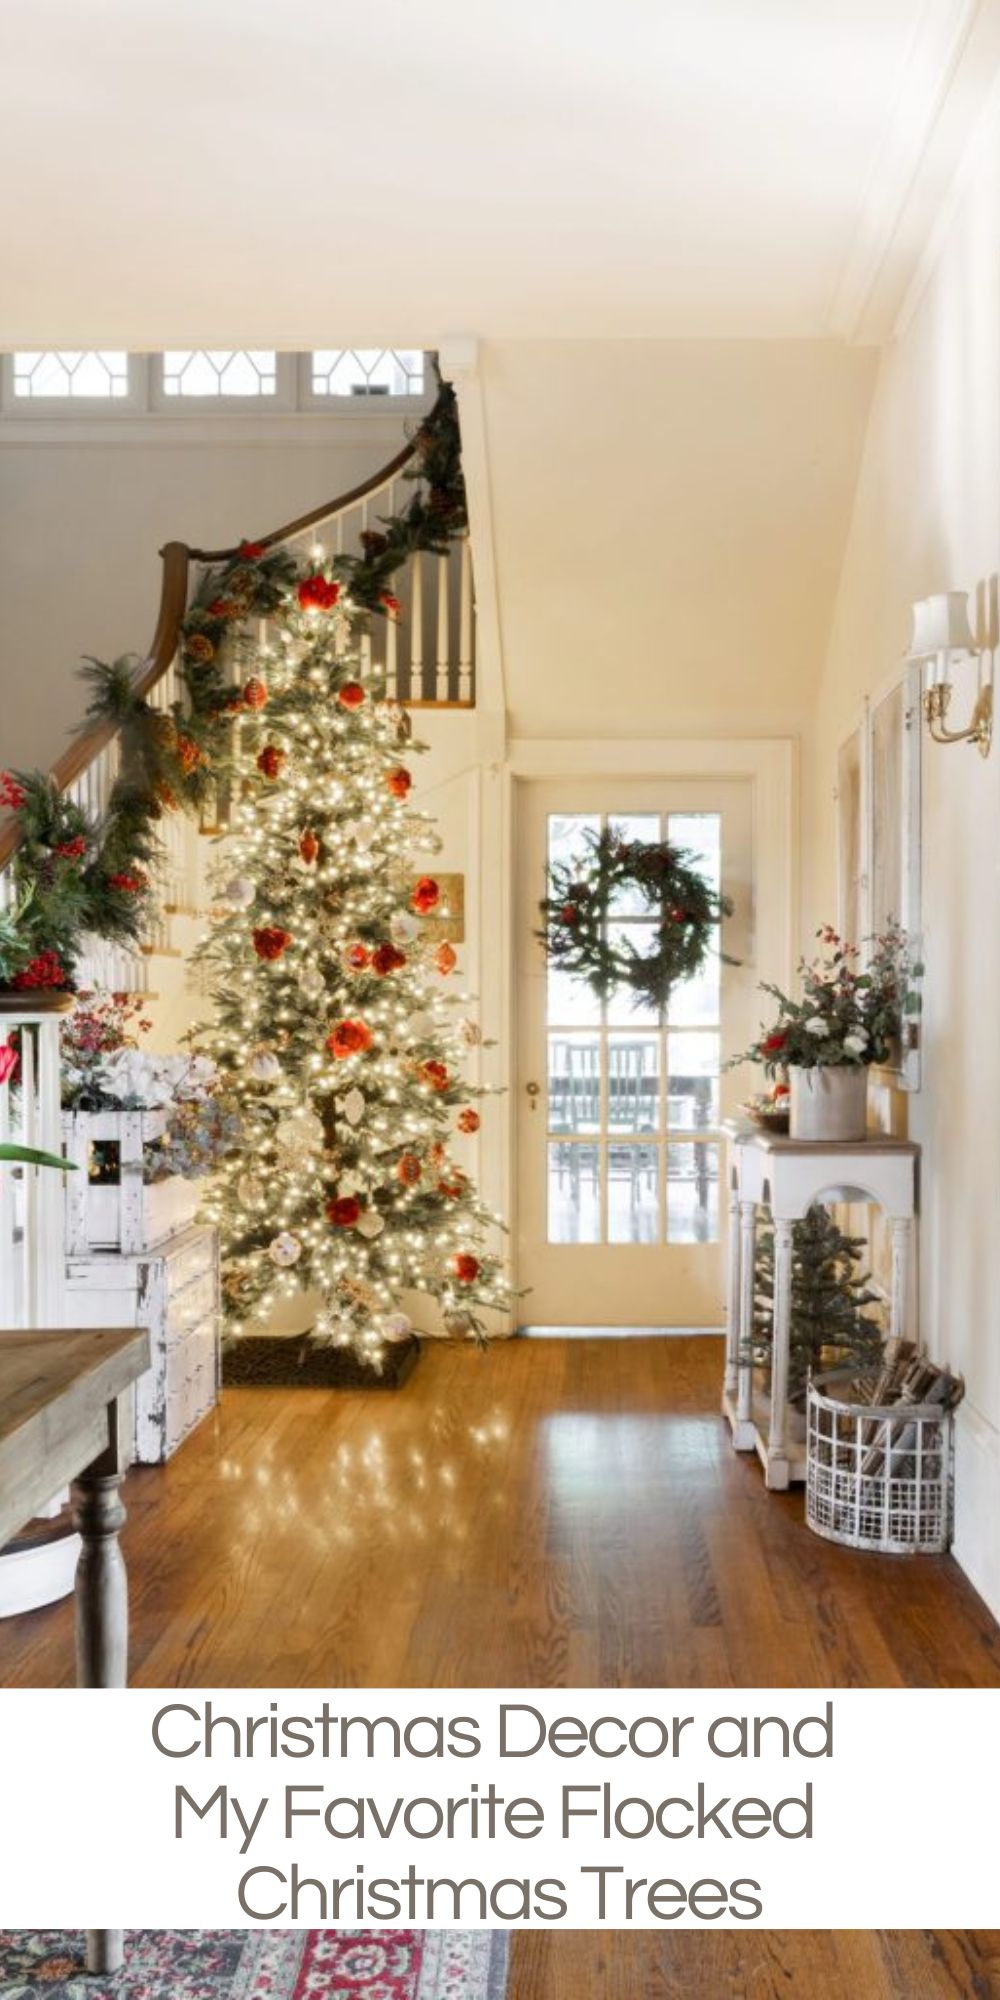 In my book A Home to Share, I featured our annual Christmas party decorated with flocked Christmas trees, wreaths, and garlands.